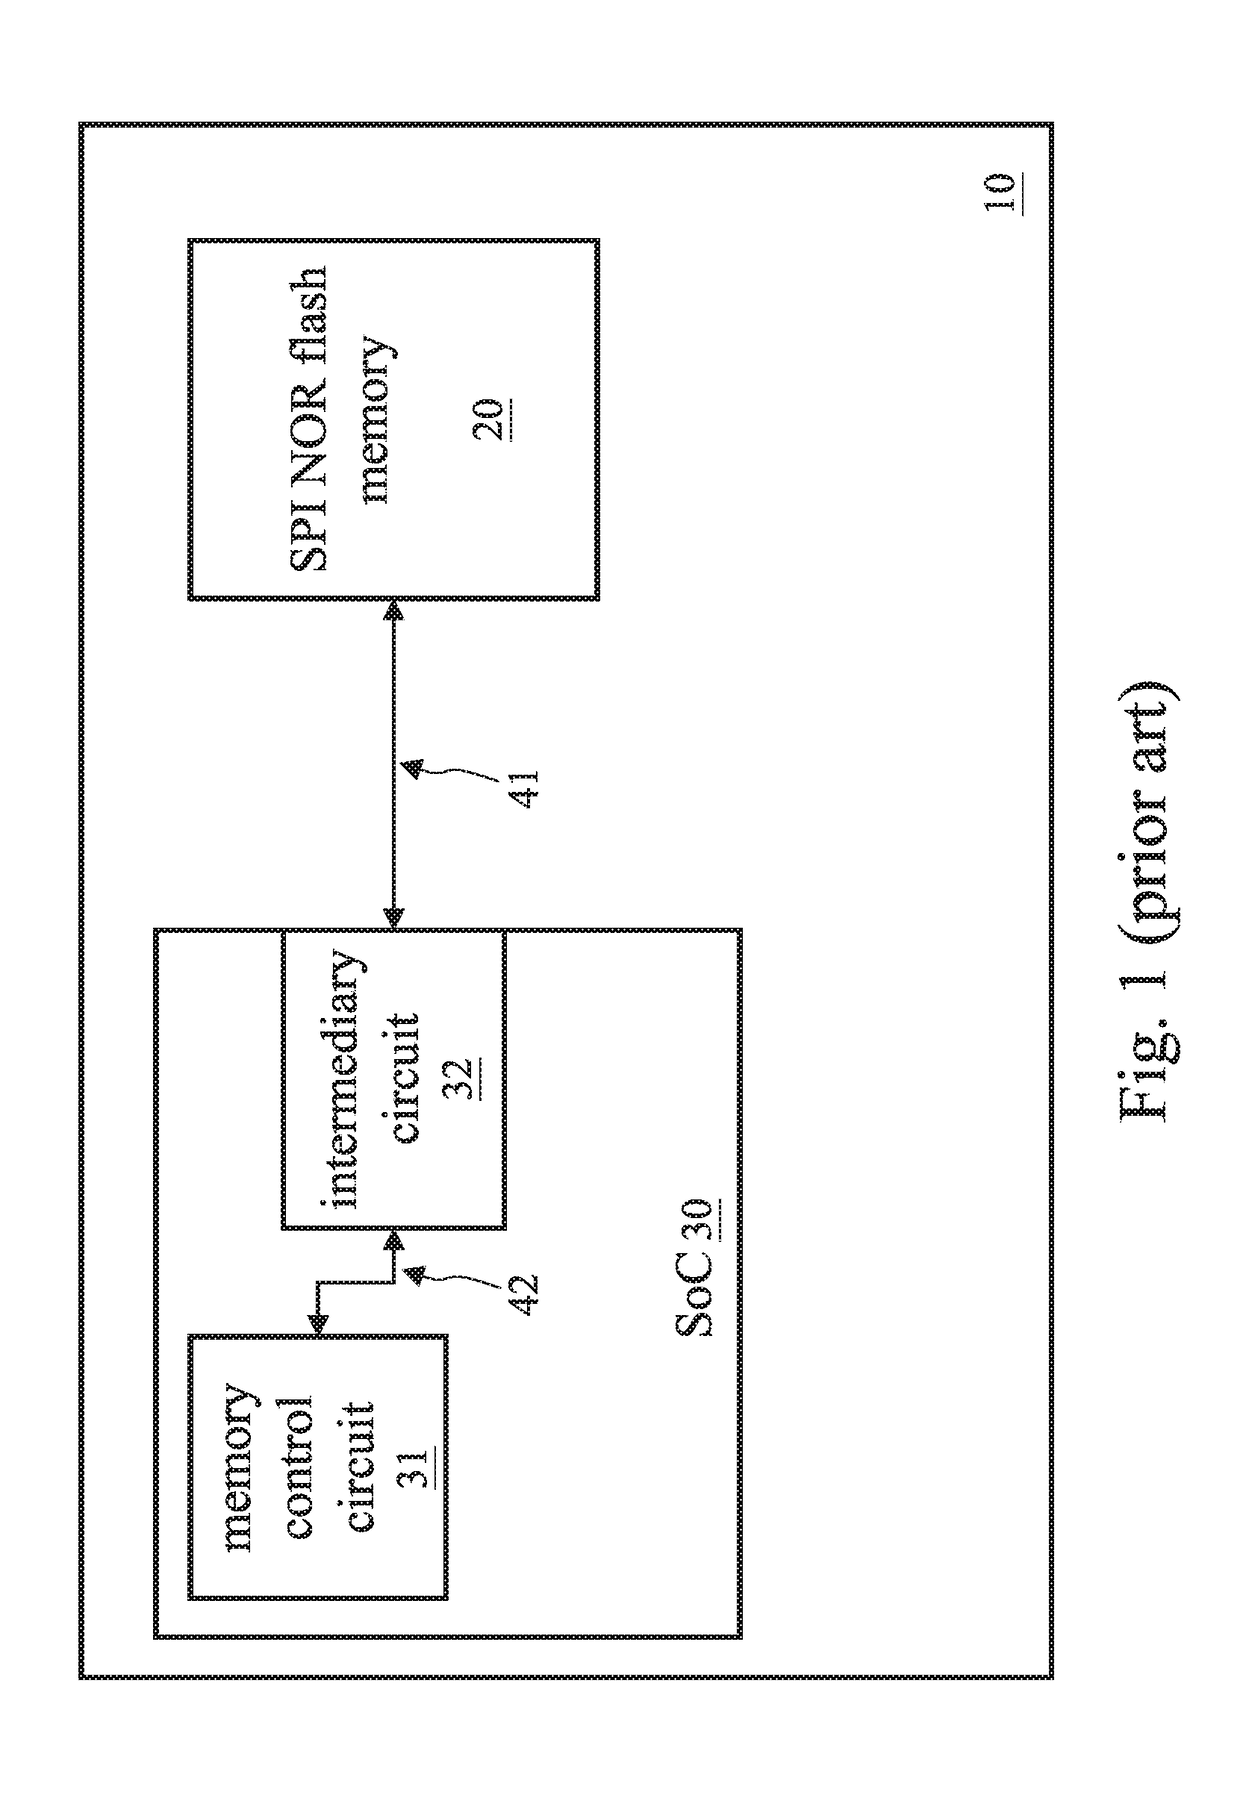 Memory control circuit and method thereof